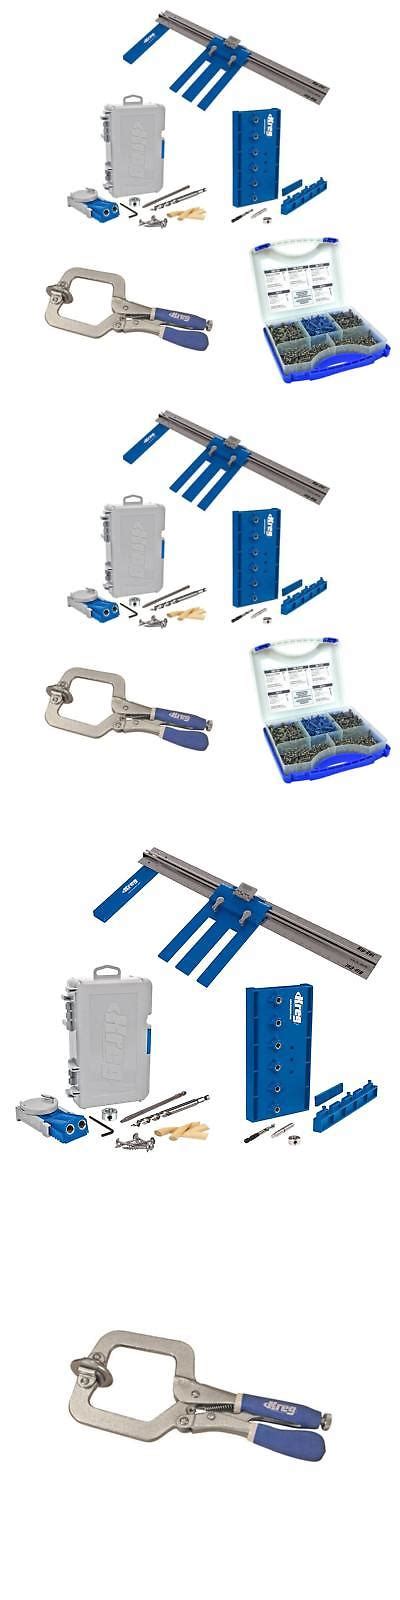 Who doesn't like to make their tools better? Jigs and Templates 179686: Kreg Diykit Diy Project Kit With Pocket-Hole Screws + Face Clamp ...